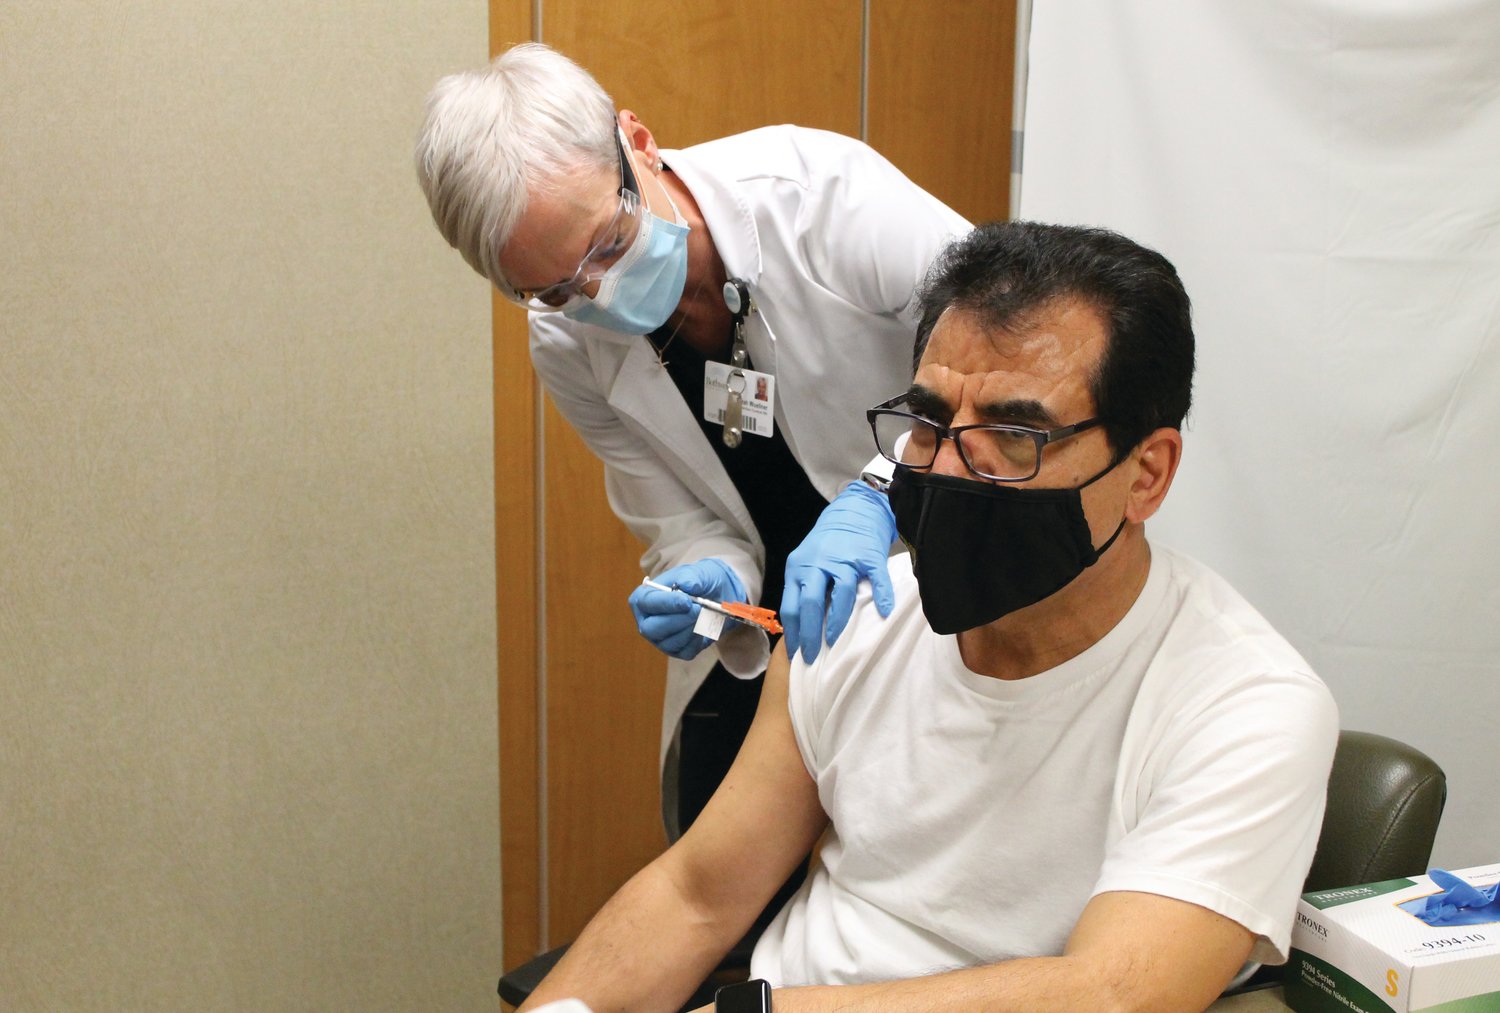 Sarah Wuellner, RN, of the Infection Control Department at Bothwell Regional Health Center, gives Dr. Assad Shaffiey, of Bothwell TLC Pediatrics, one of the first COVID-19 vaccines in Sedalia on Dec. 18, 2020, at Bothwell.